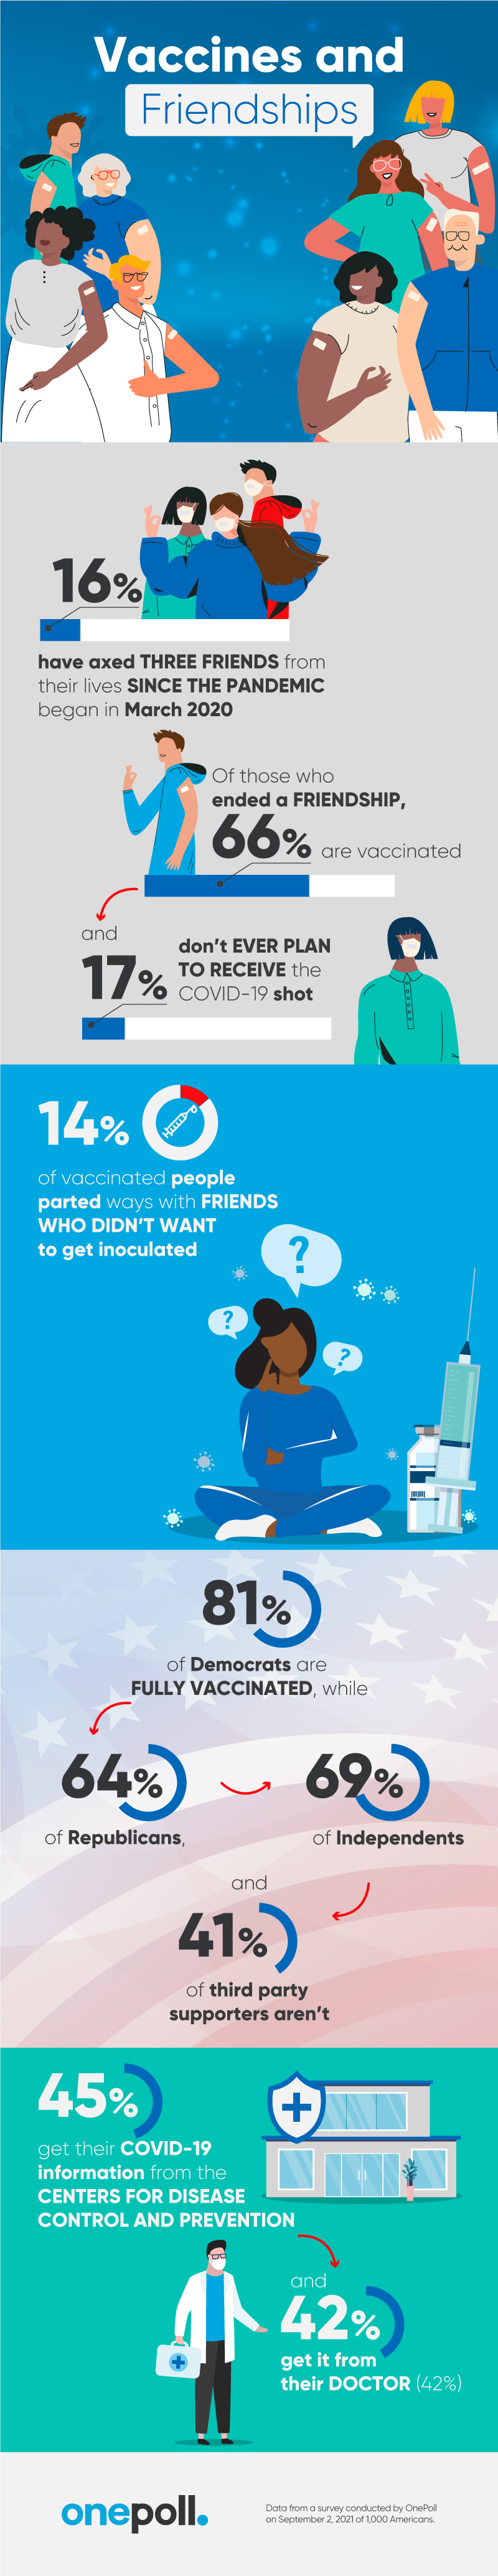 OnePoll infographic: Vaccines and friendships survey results